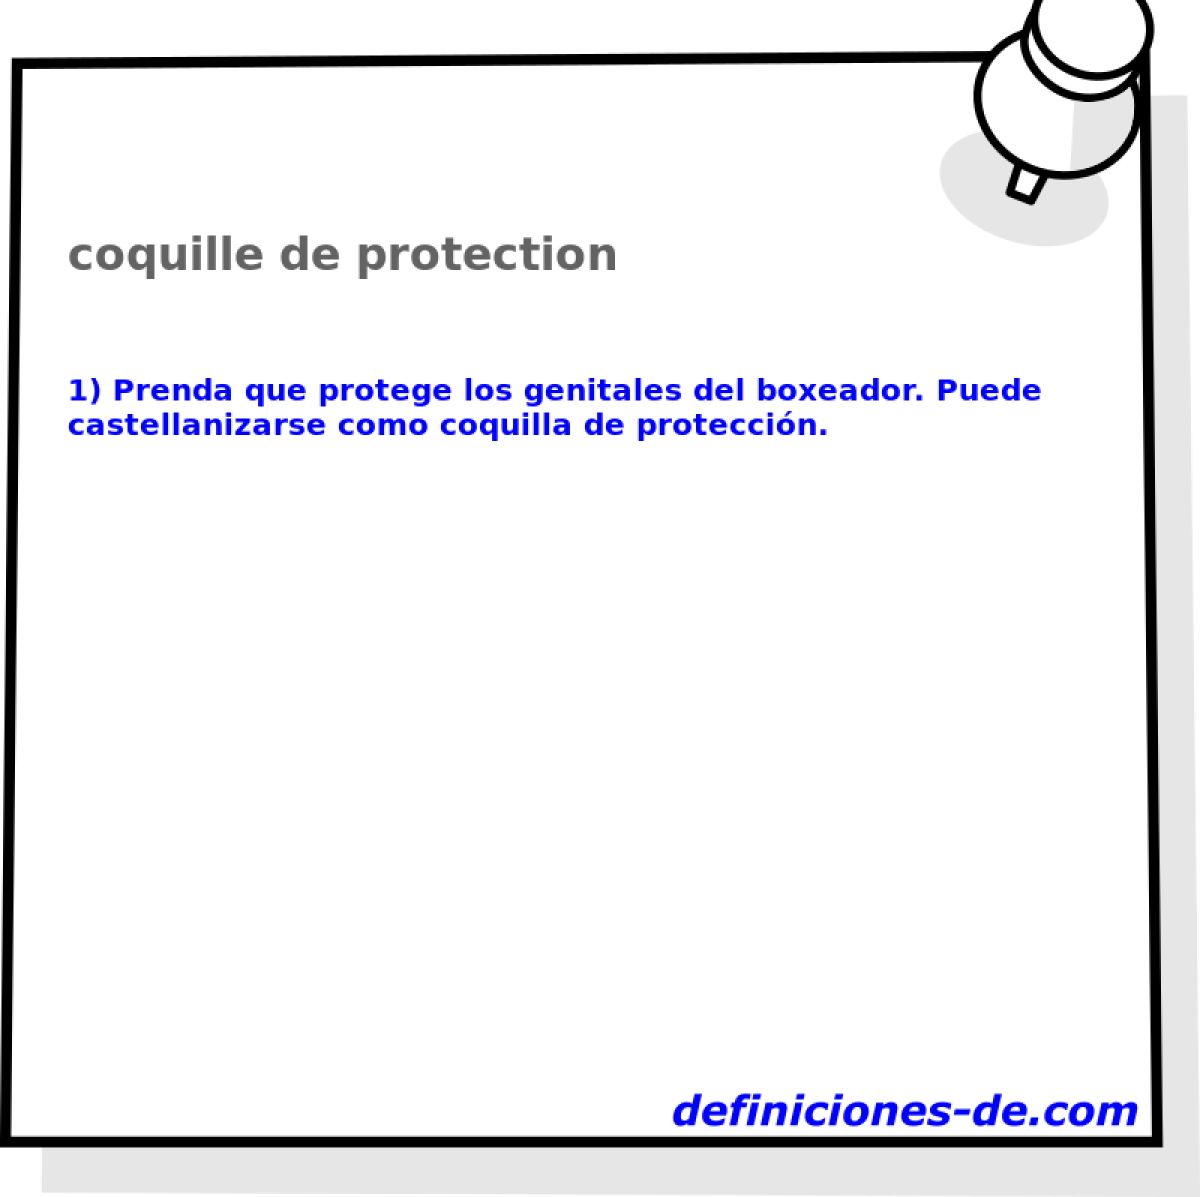 coquille de protection 